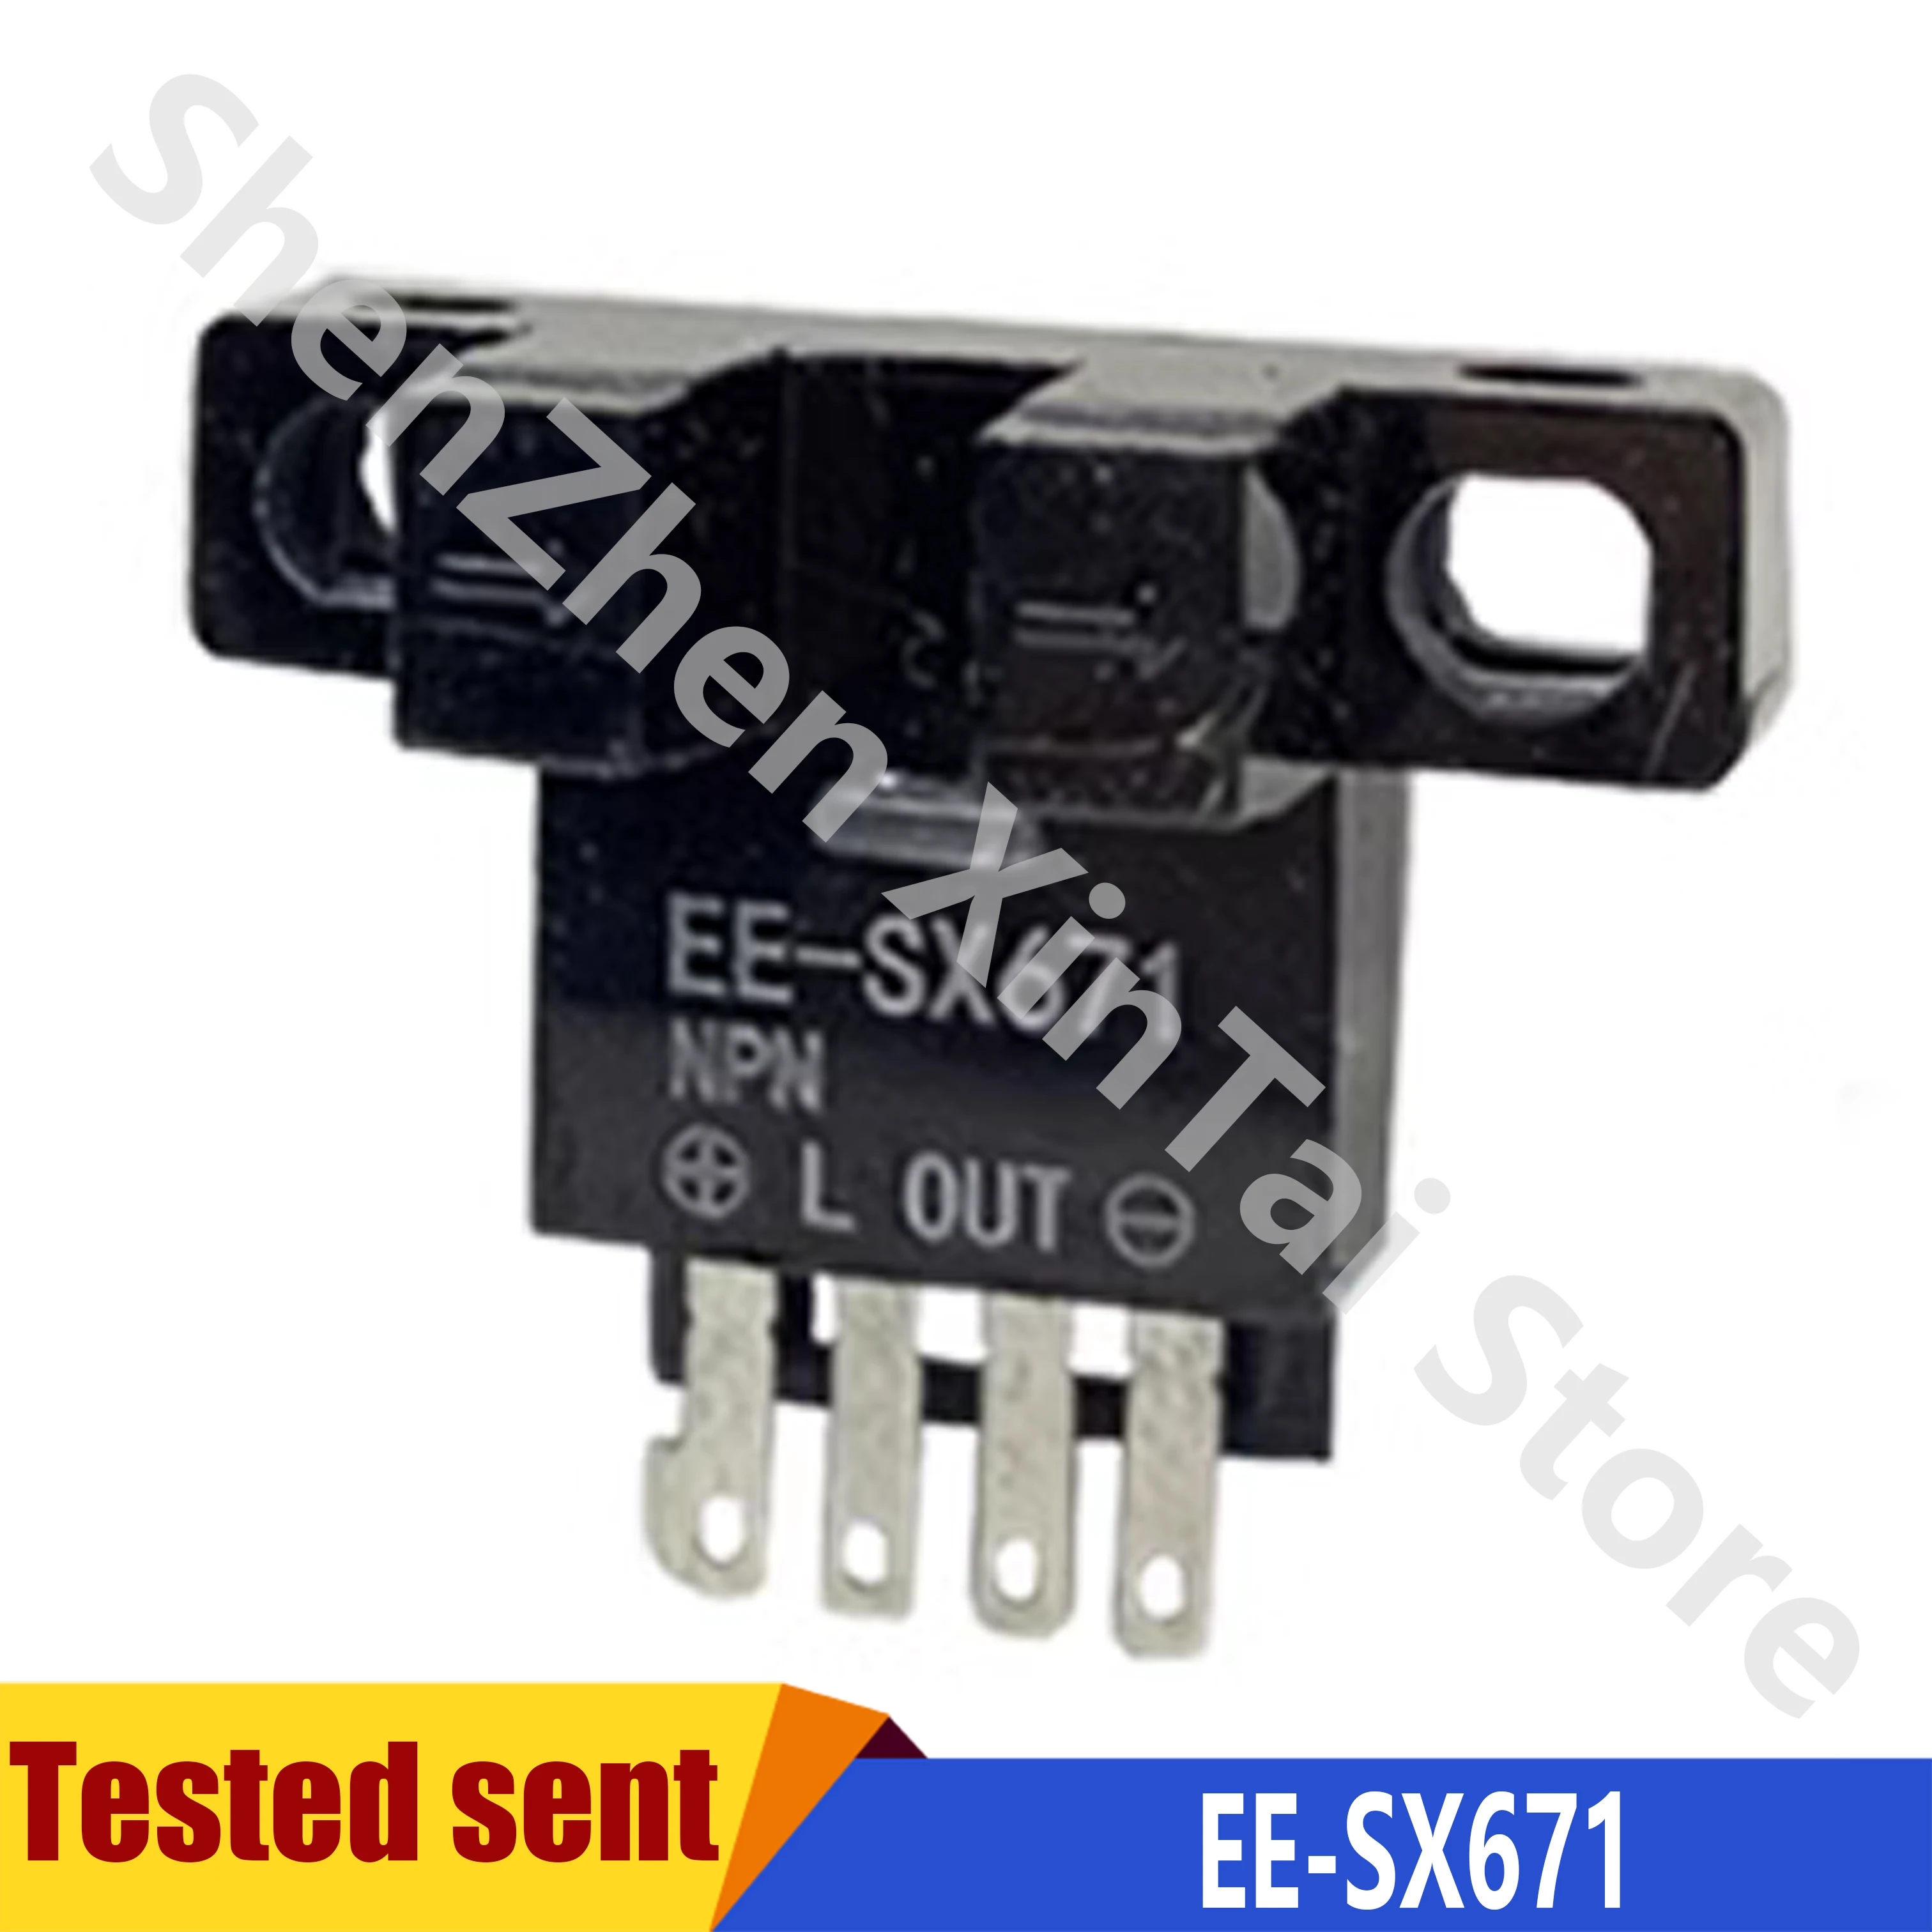 

New Photoelectric Switch Sensors EE-SX670 EE-SX671 EE-SX672 EE-SX673 EE-SX674 EE-SX670A EE-SX671A EE-SX672A EE-SX673A EE-SX674A